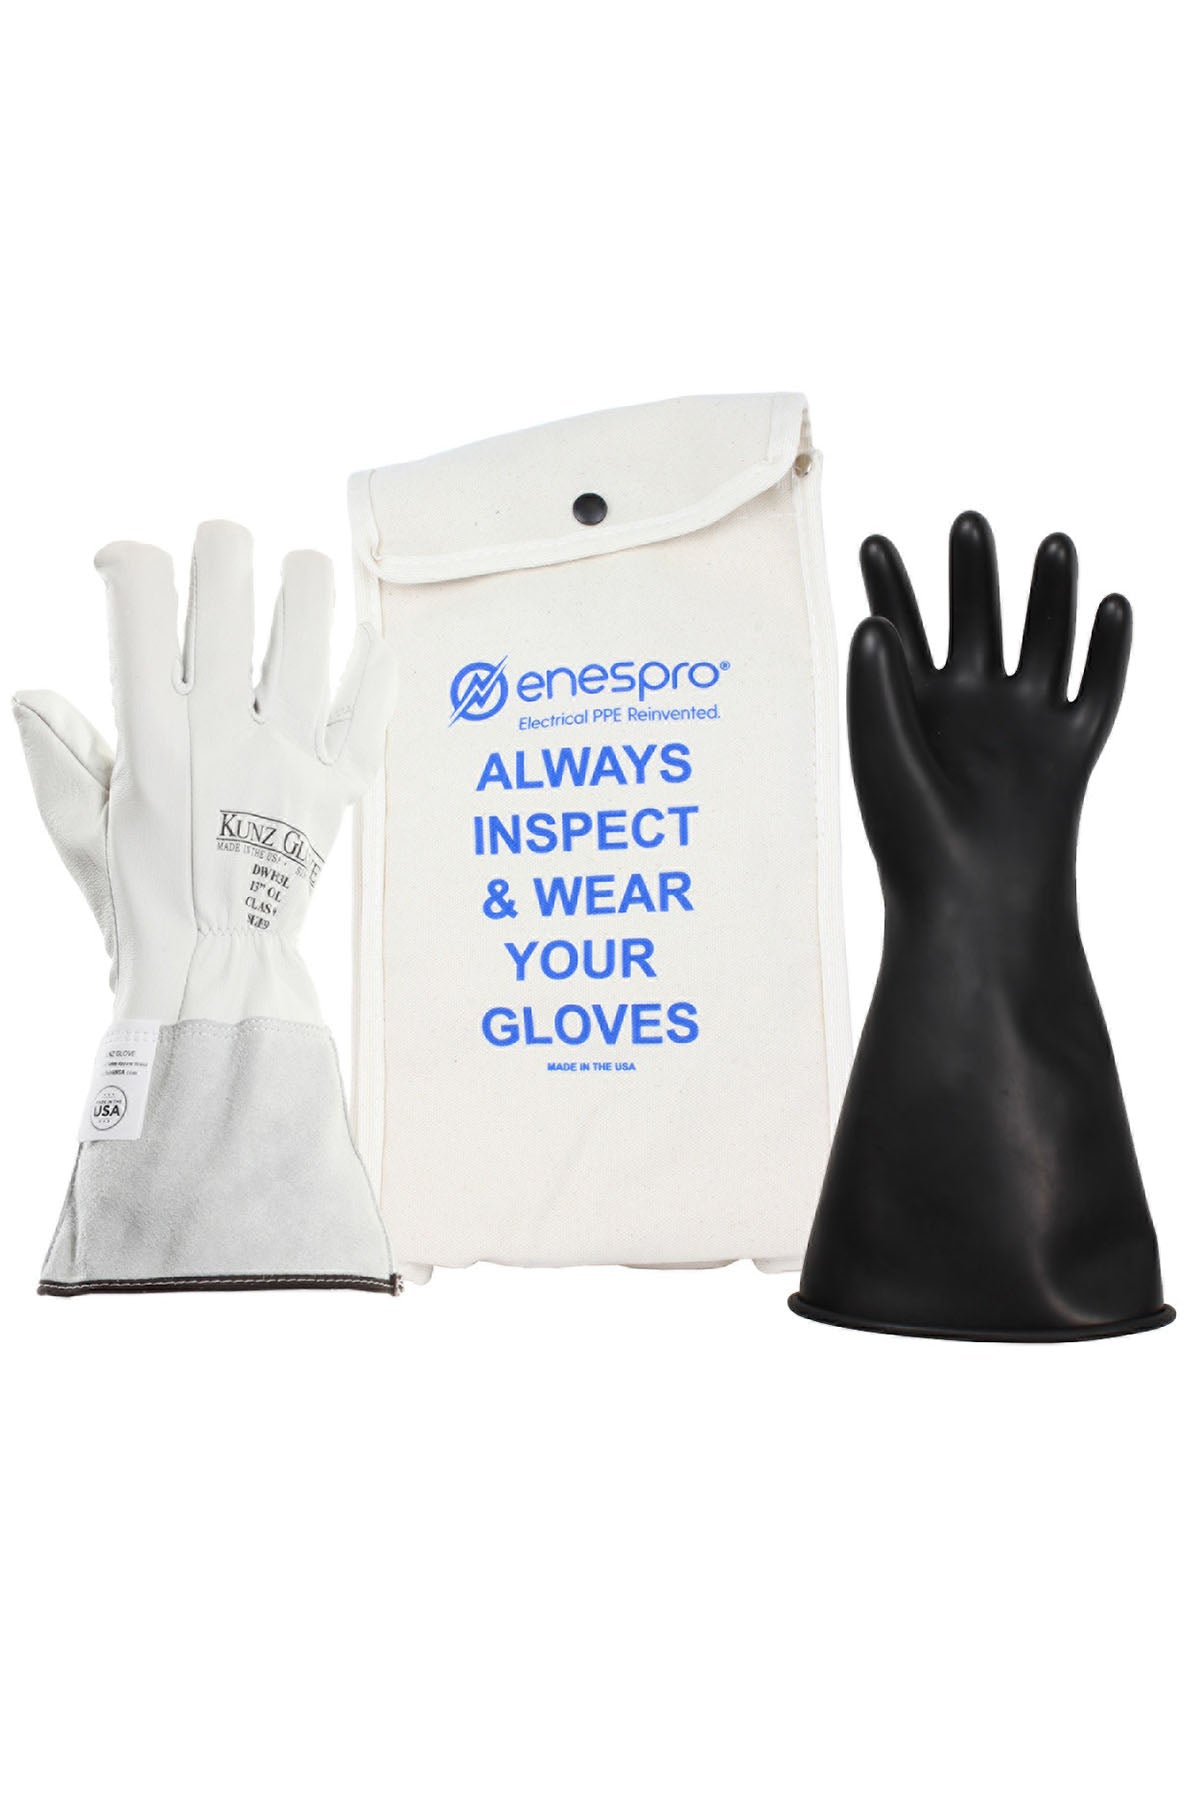 Enespro Made in USA Class 0 Rubber Voltage 14" Glove Kit